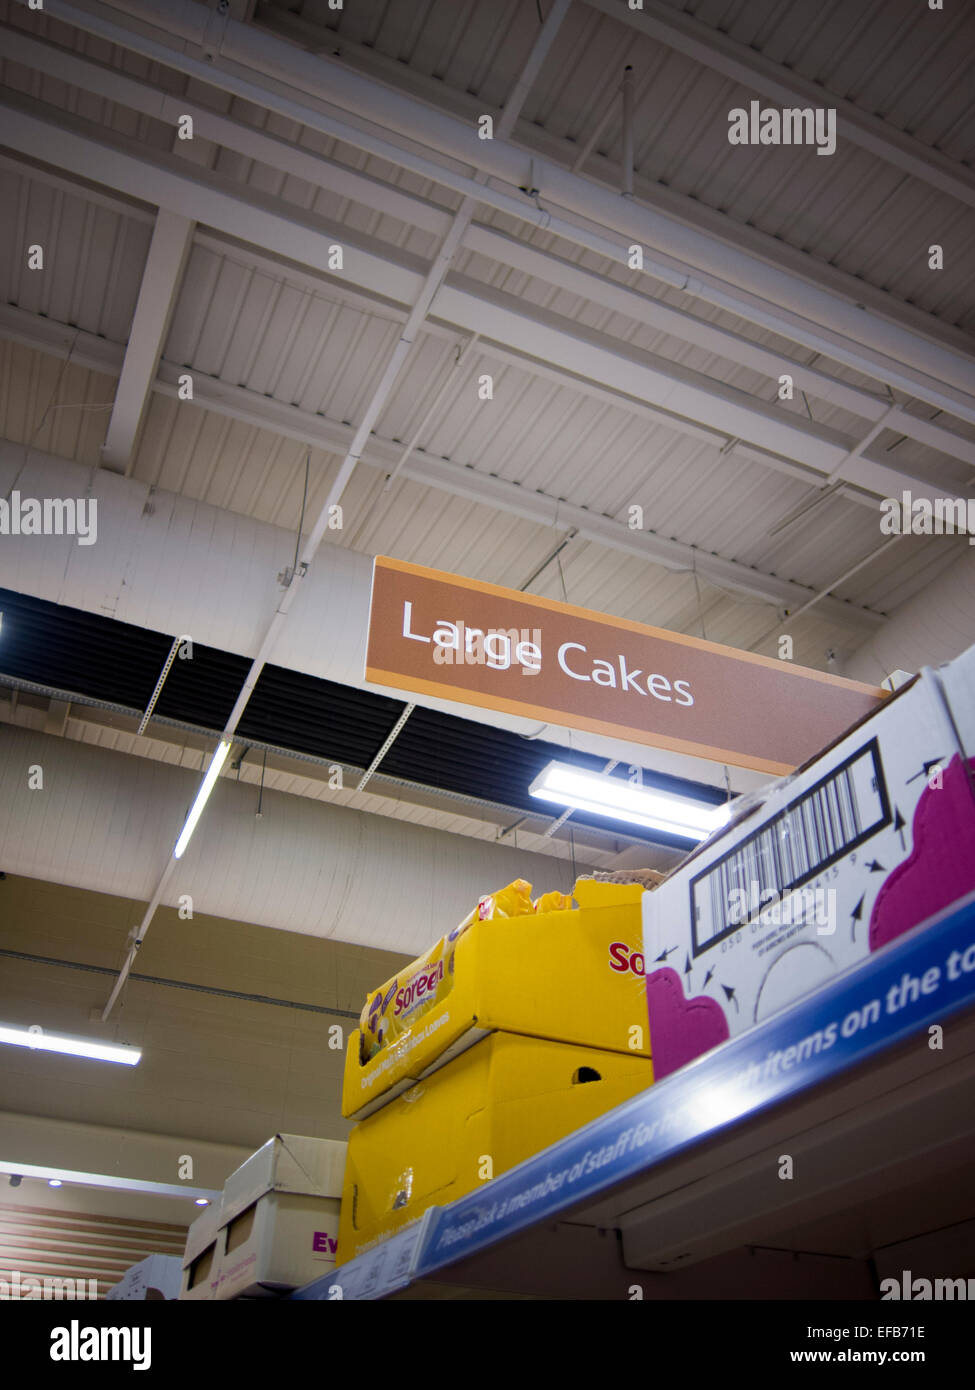 Large Cakes sign in a supermarket (Tesco). Stock Photo